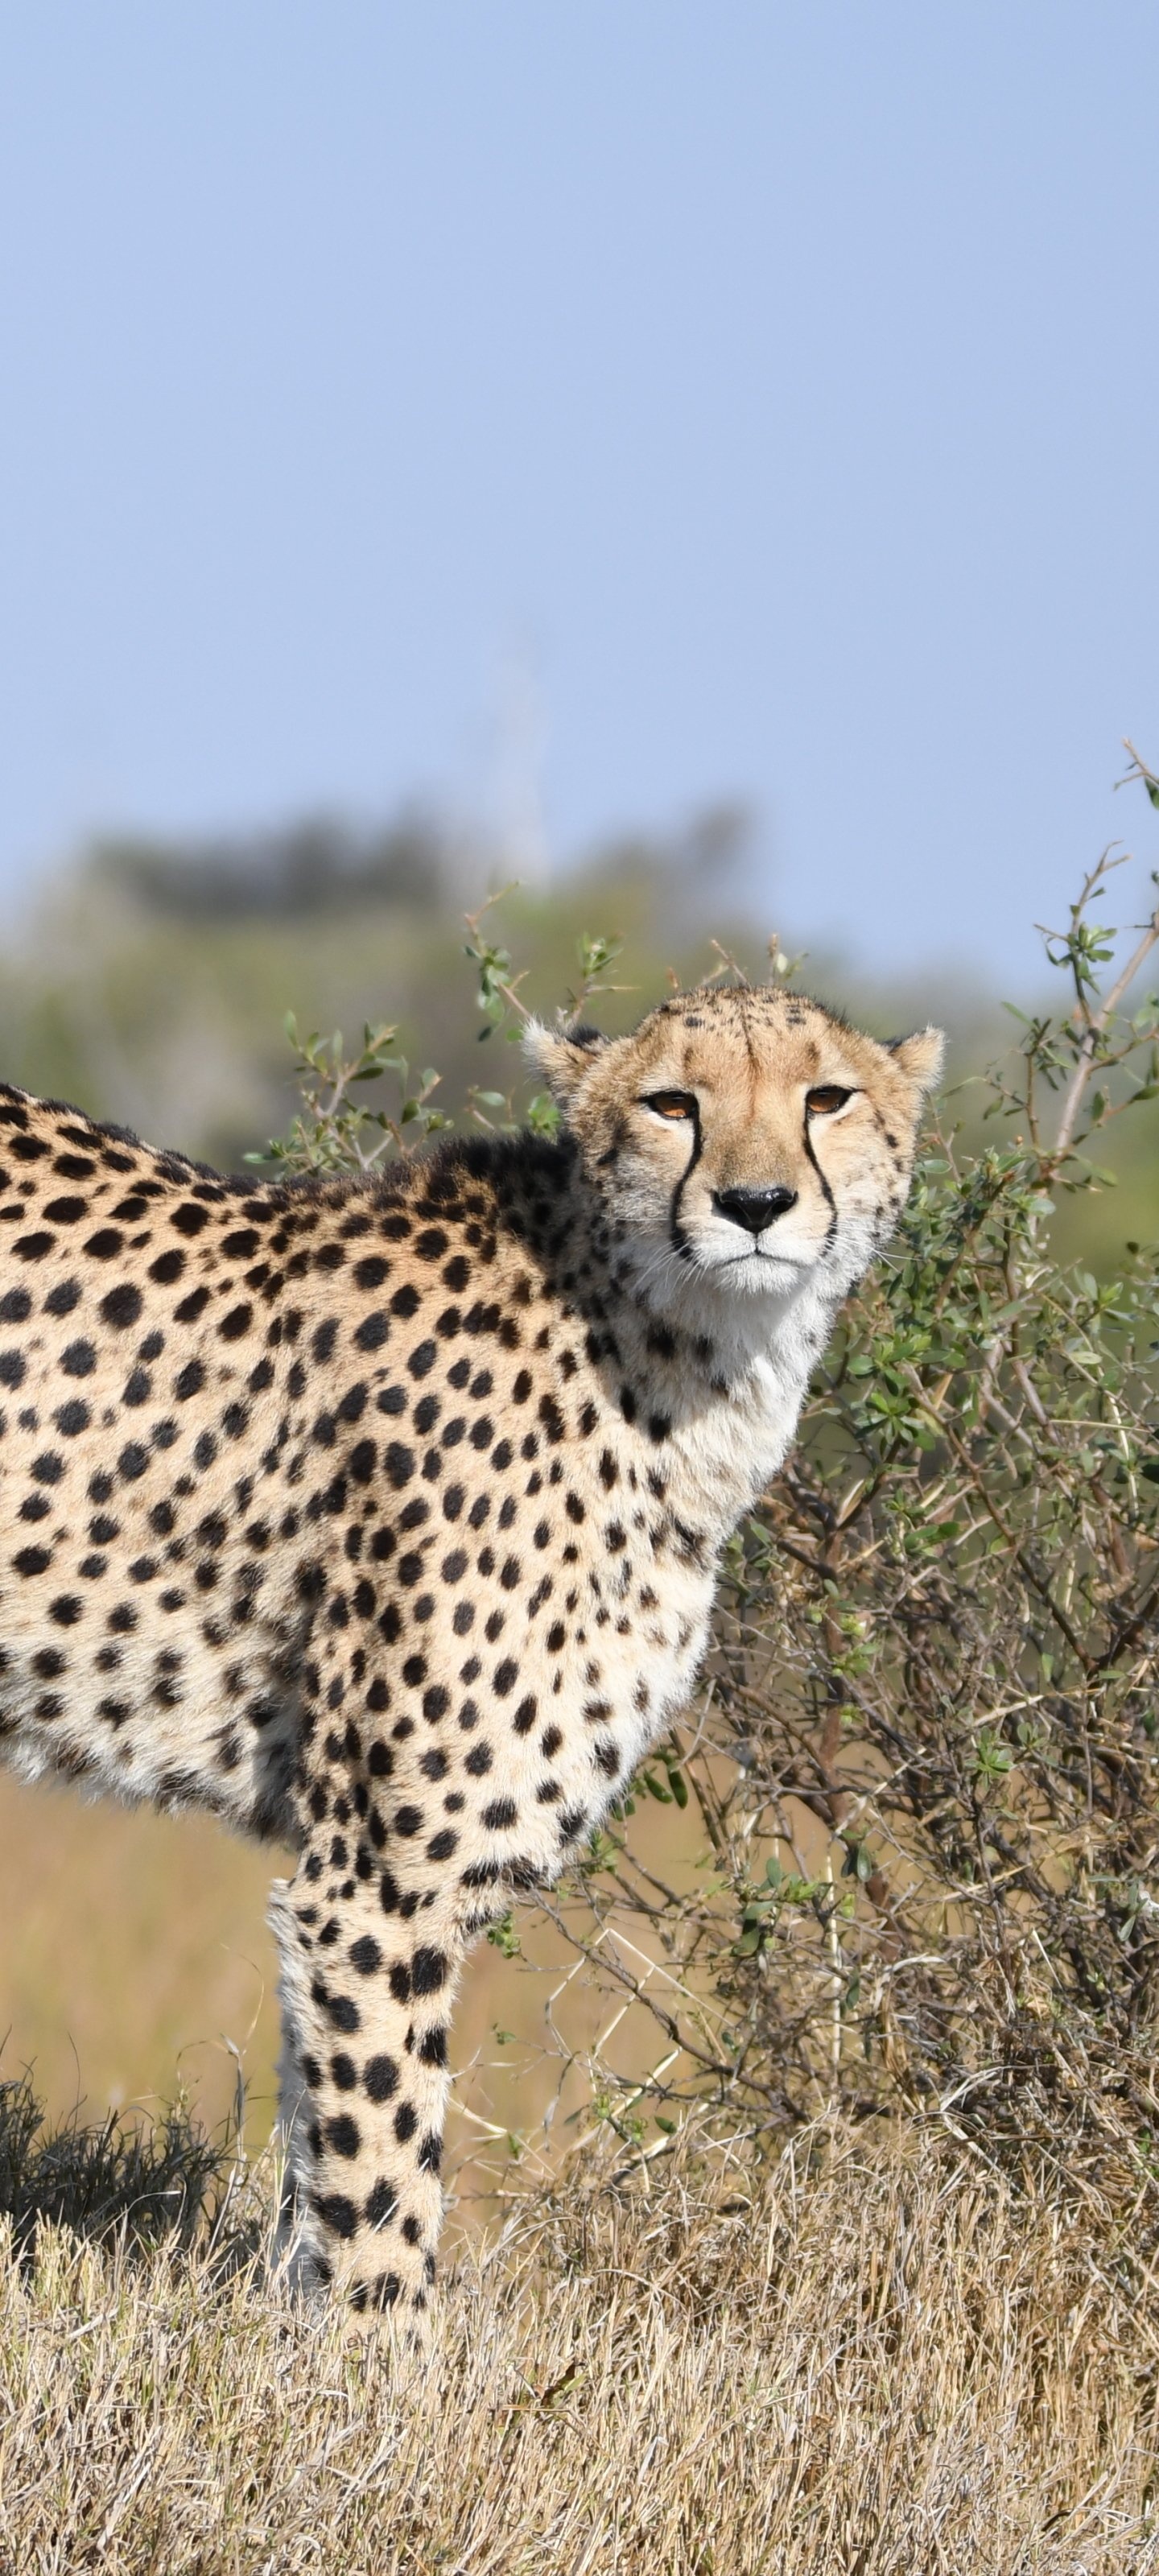 Animal cheetah, Graceful and swift, Exquisite spotted coat, African wilderness, 1440x3200 HD Handy